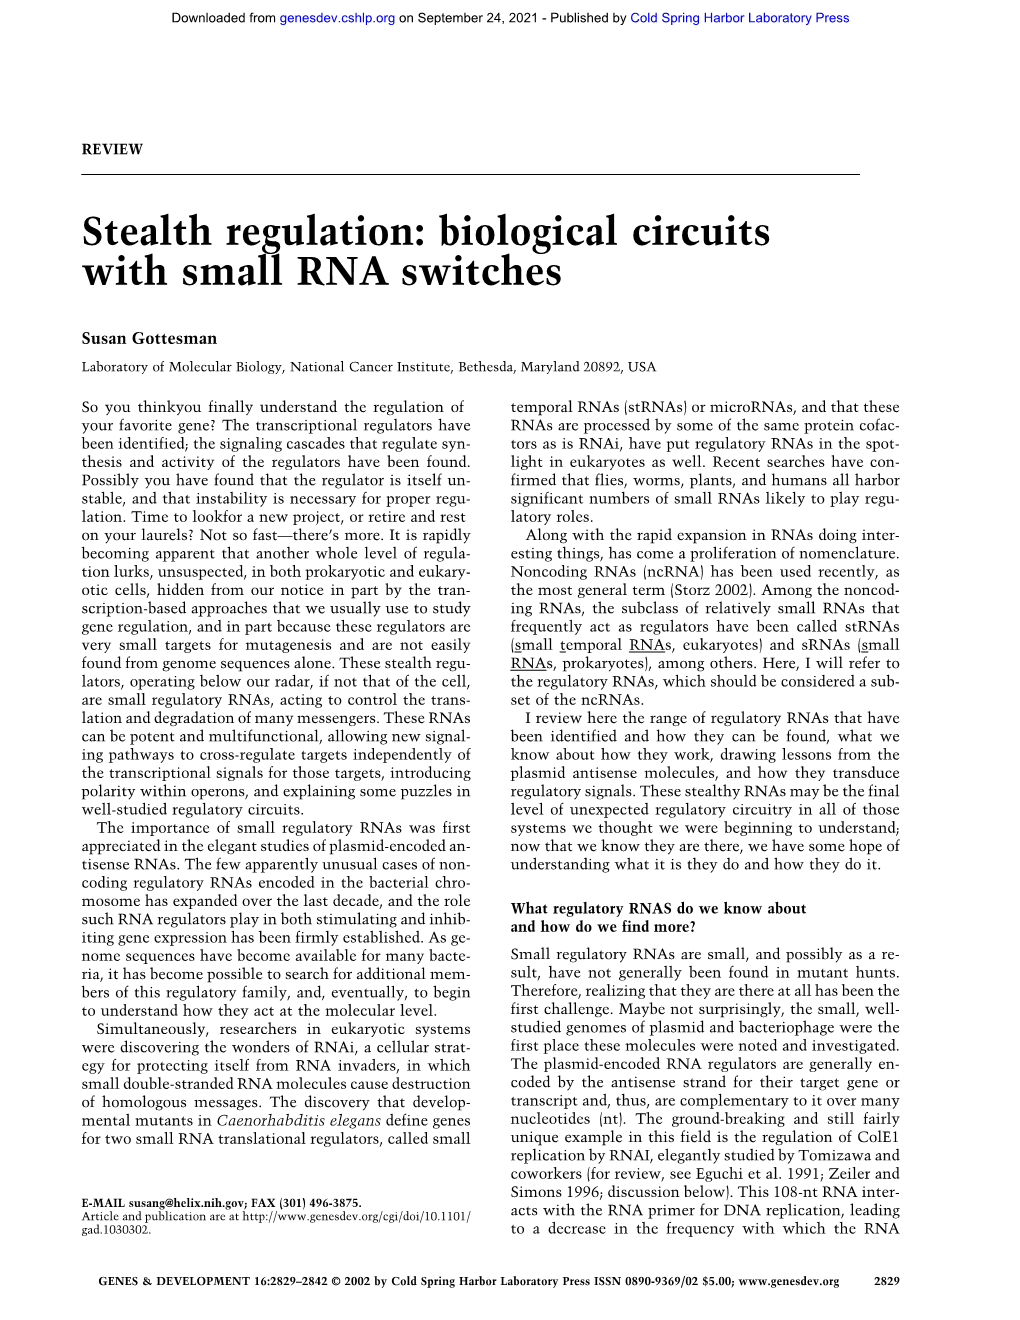 Biological Circuits with Small RNA Switches